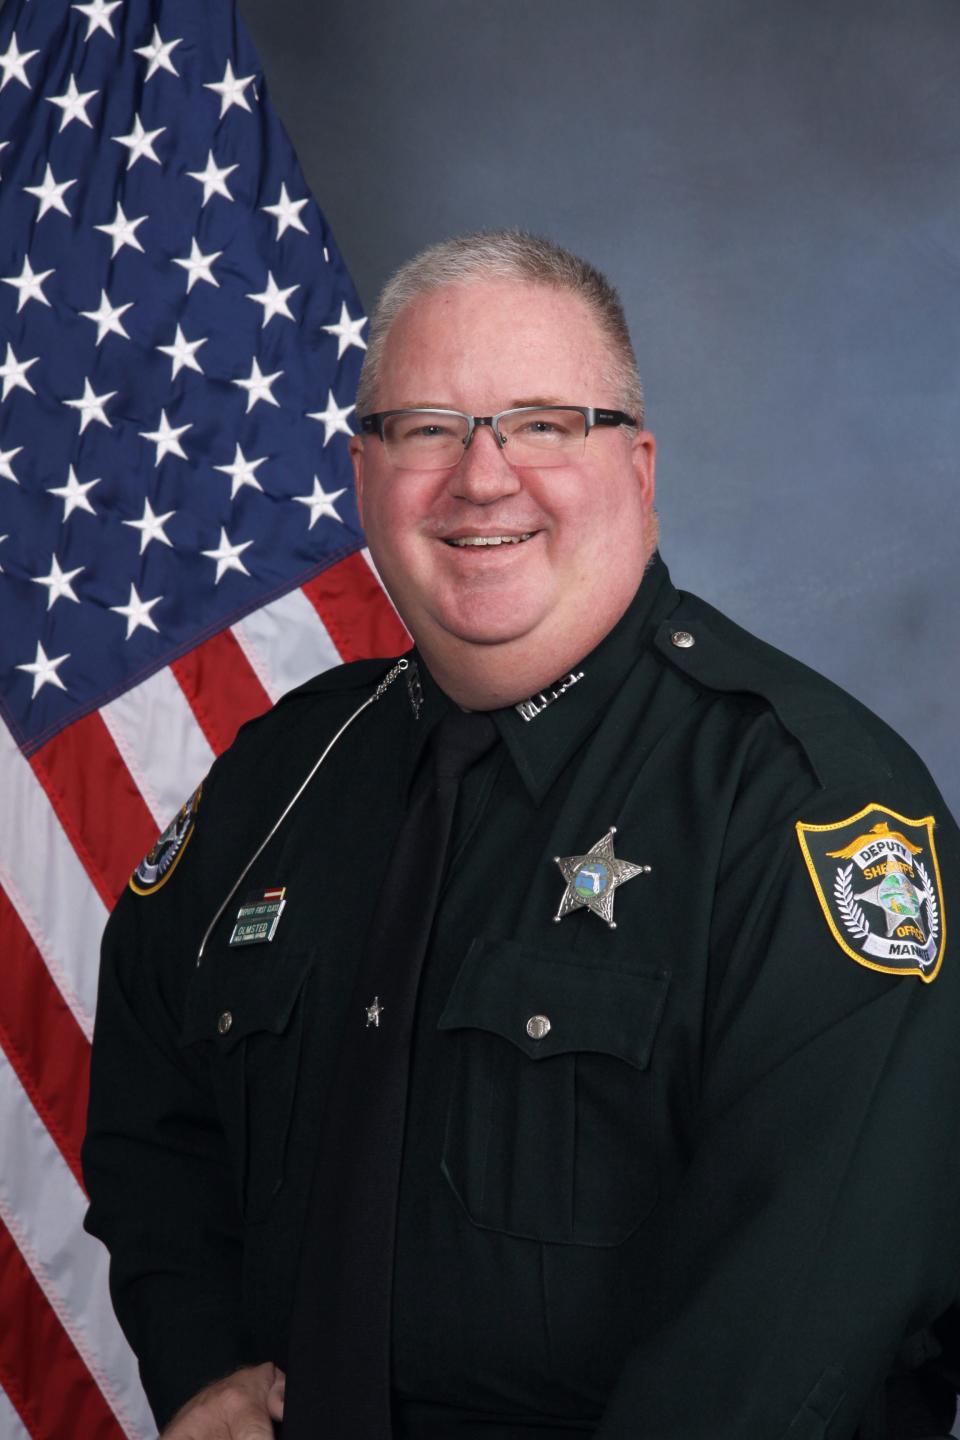 Former deputy Donald Olmsted Jr. resigned after nearly 35 years of service after officials found that he misused office equipment to contact a woman and sent her multiple lewd texts while on duty.